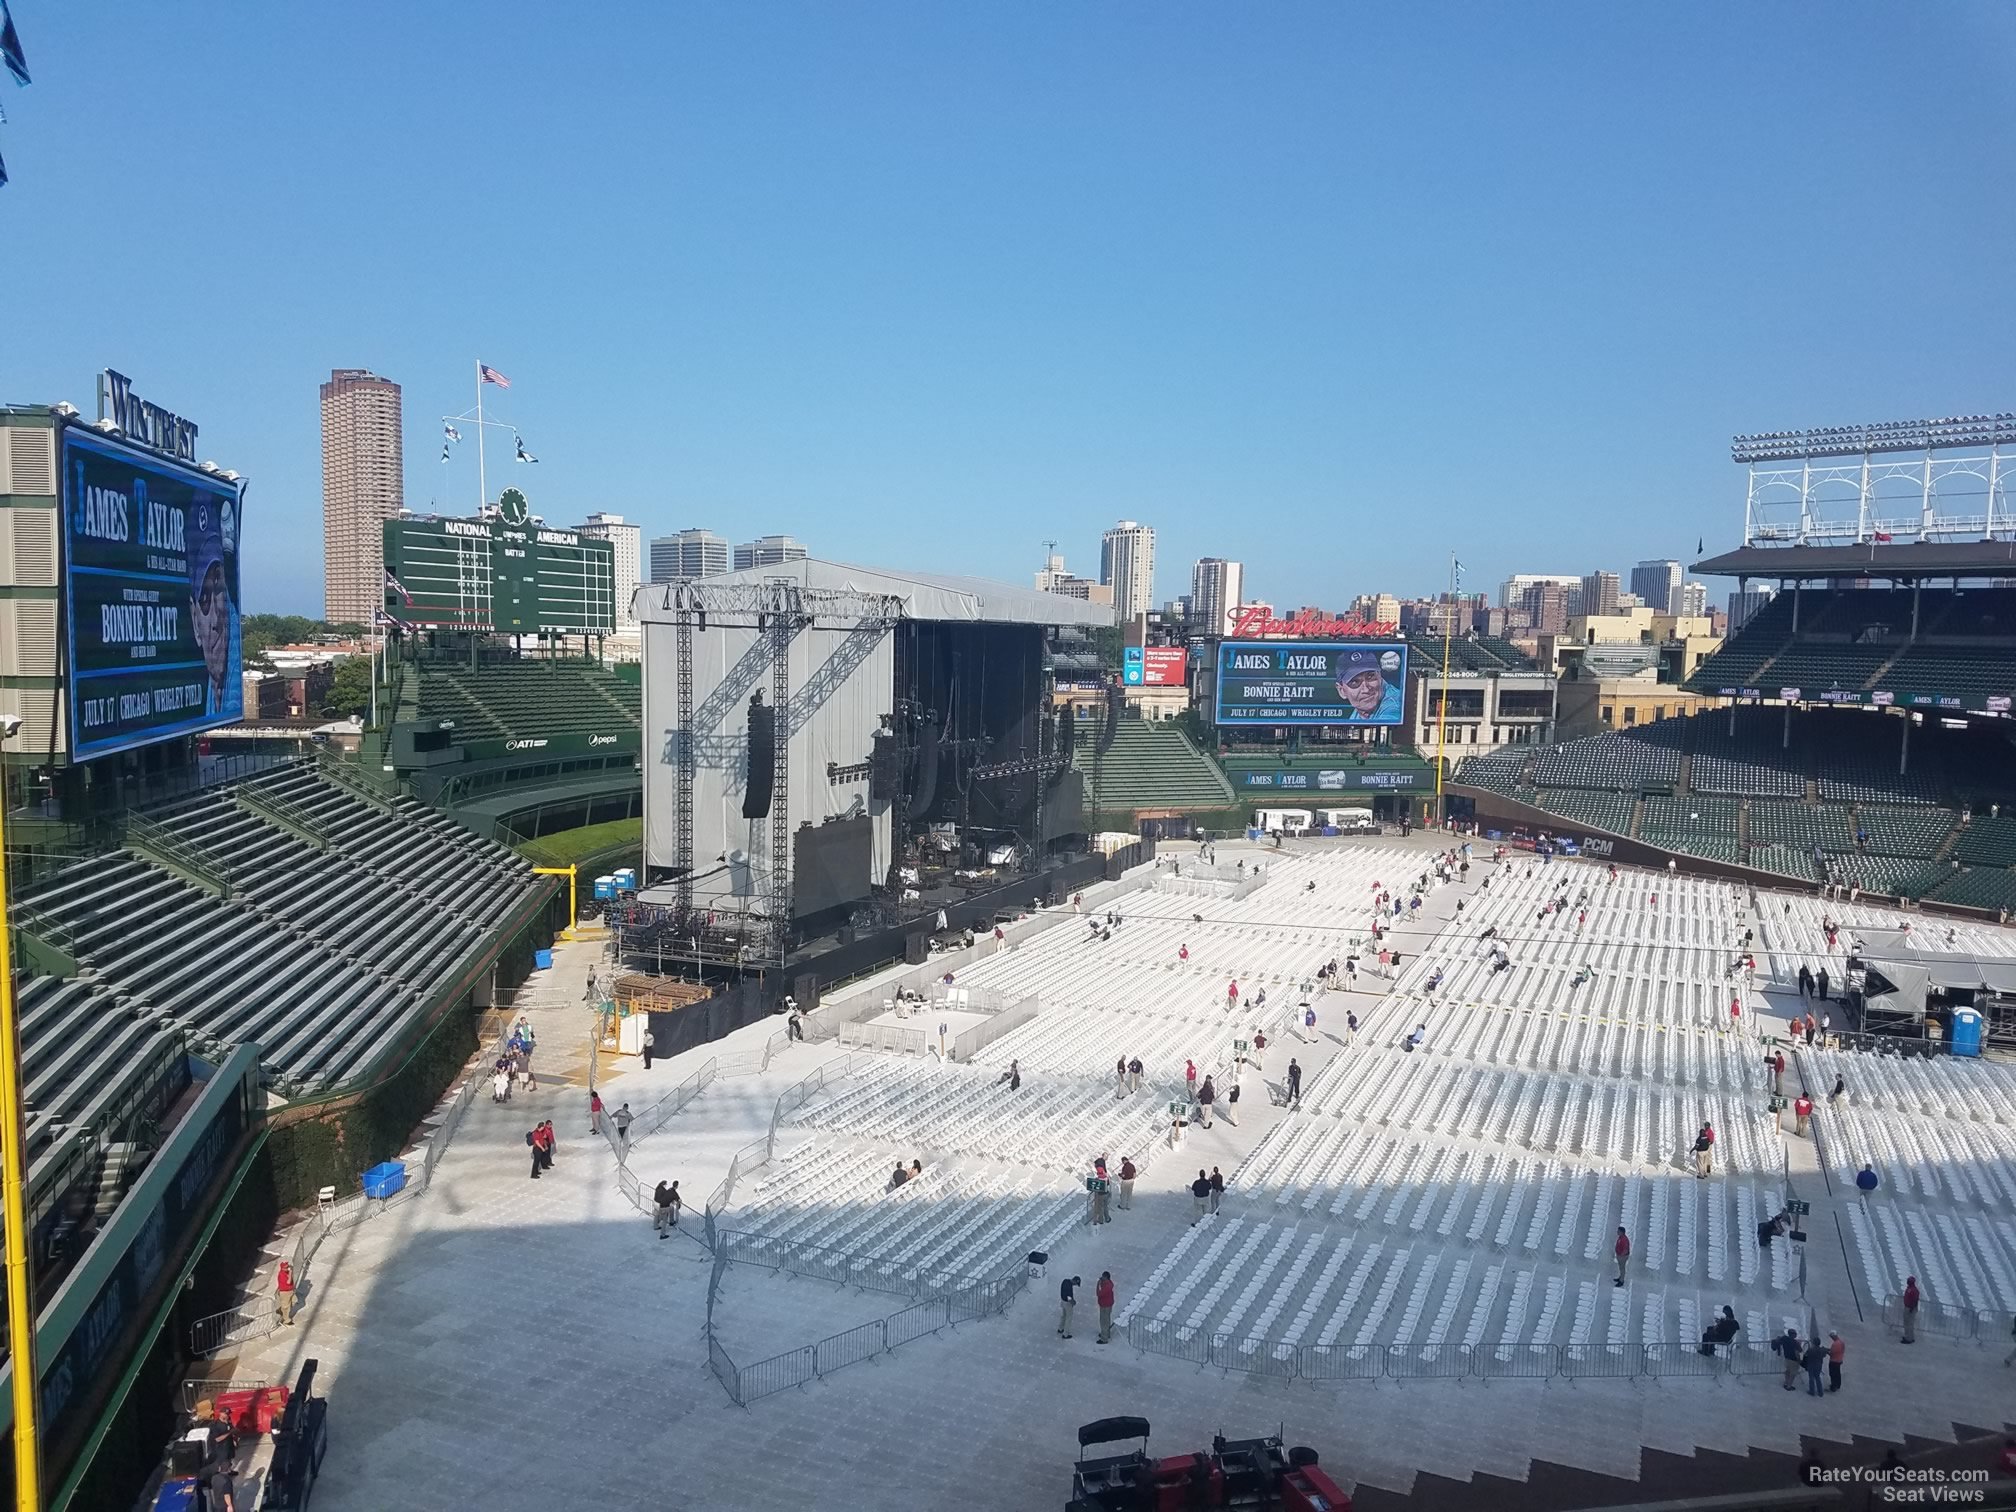 section 304, row 7 seat view  for concert - wrigley field